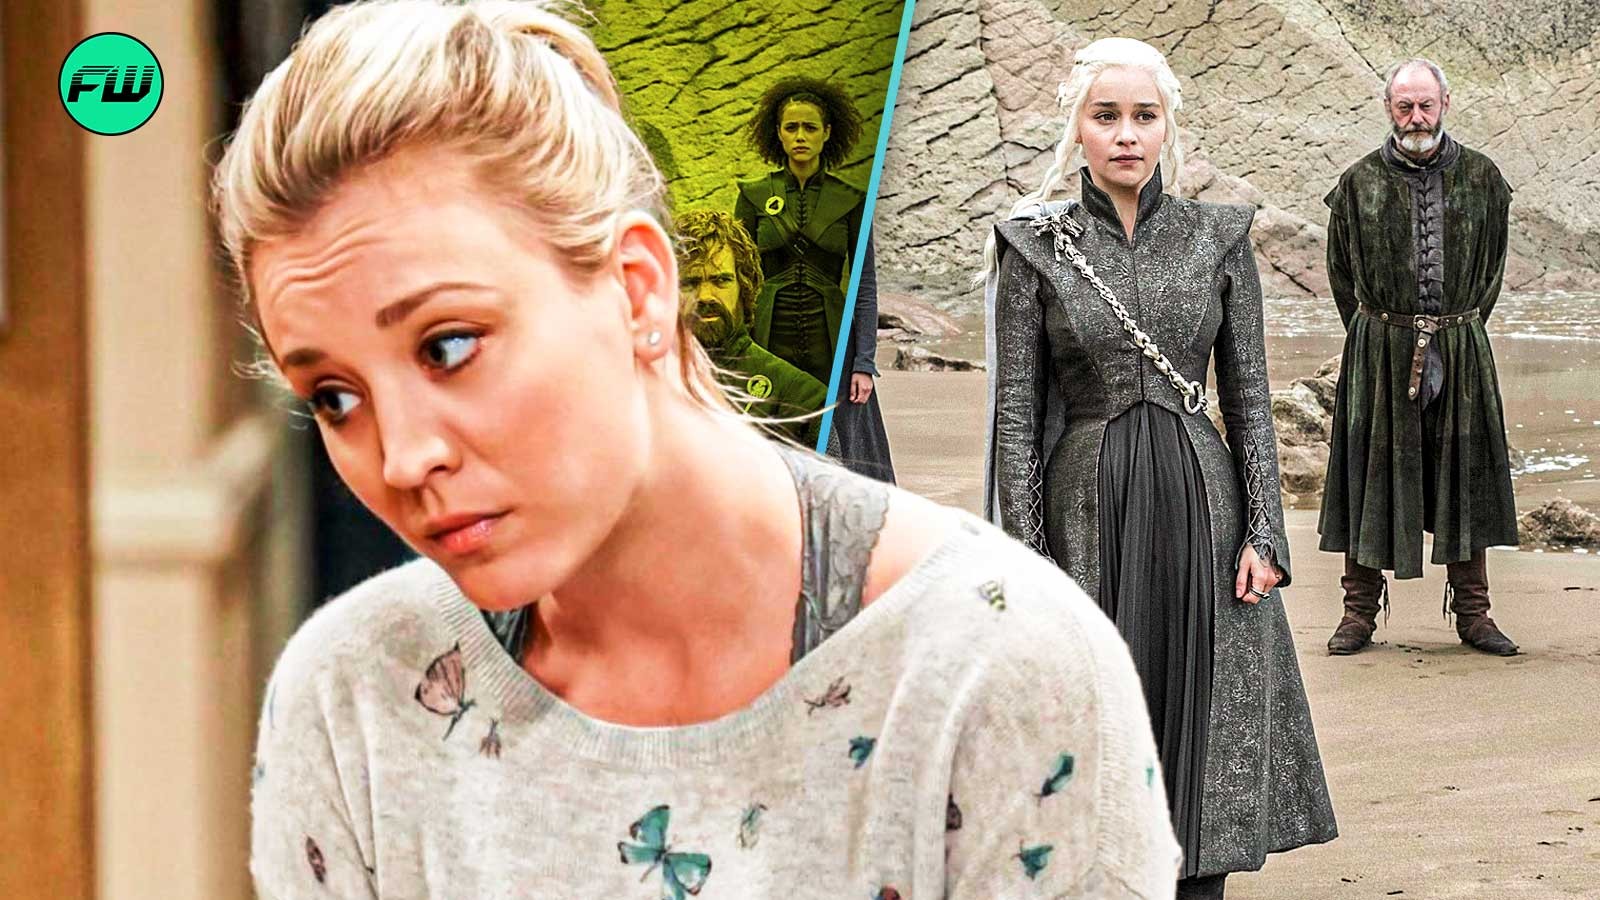 kaley cuoco in the big bang theory, game of thrones